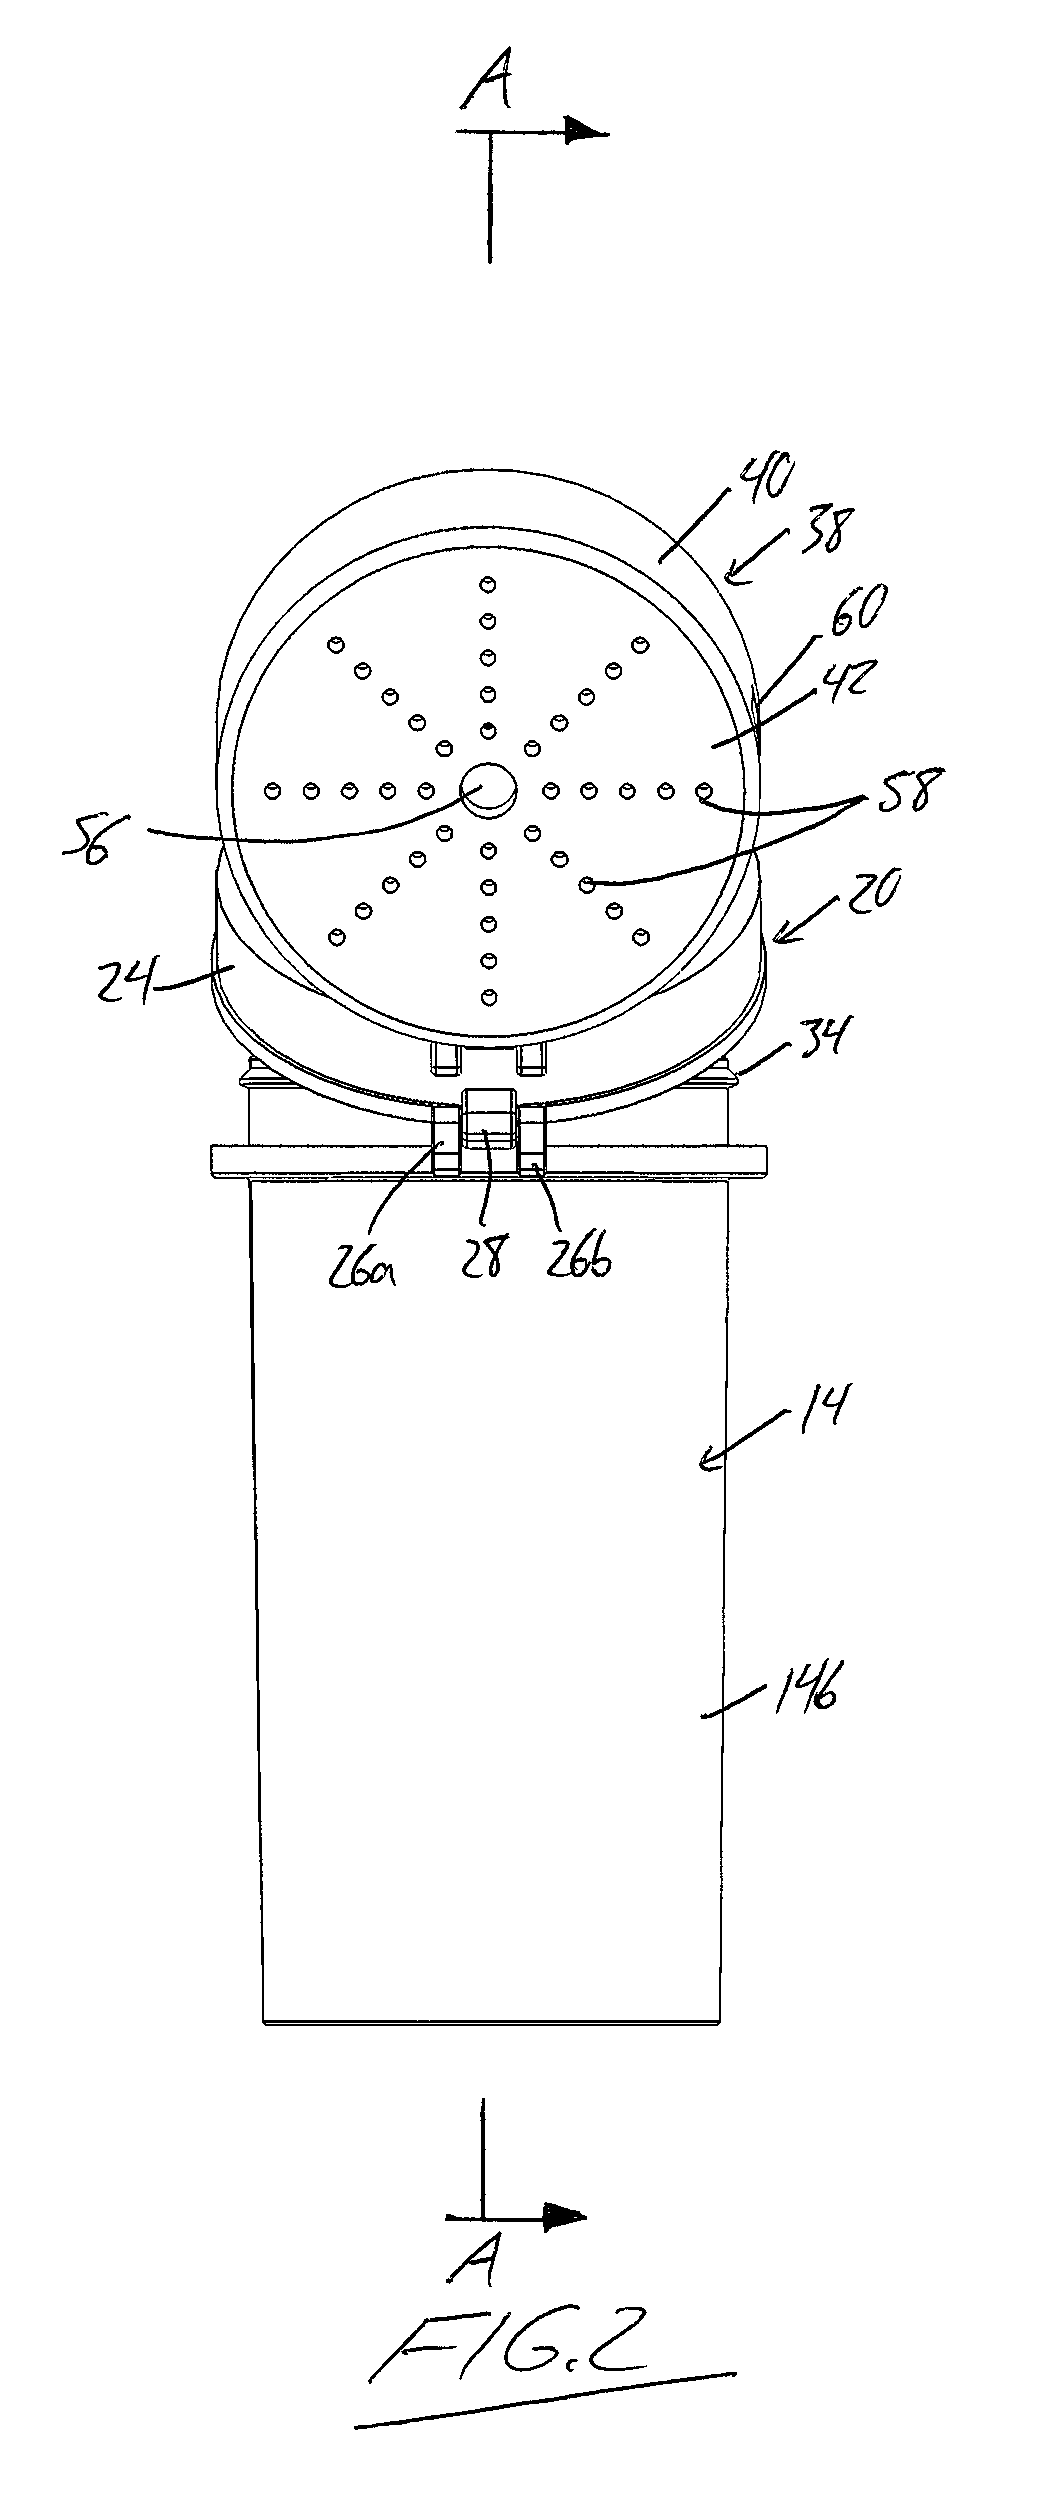 Pill bottle lid incorporating audible messaging device, and pairing thereof with external devices for dosage reminder and conflict checking purposes